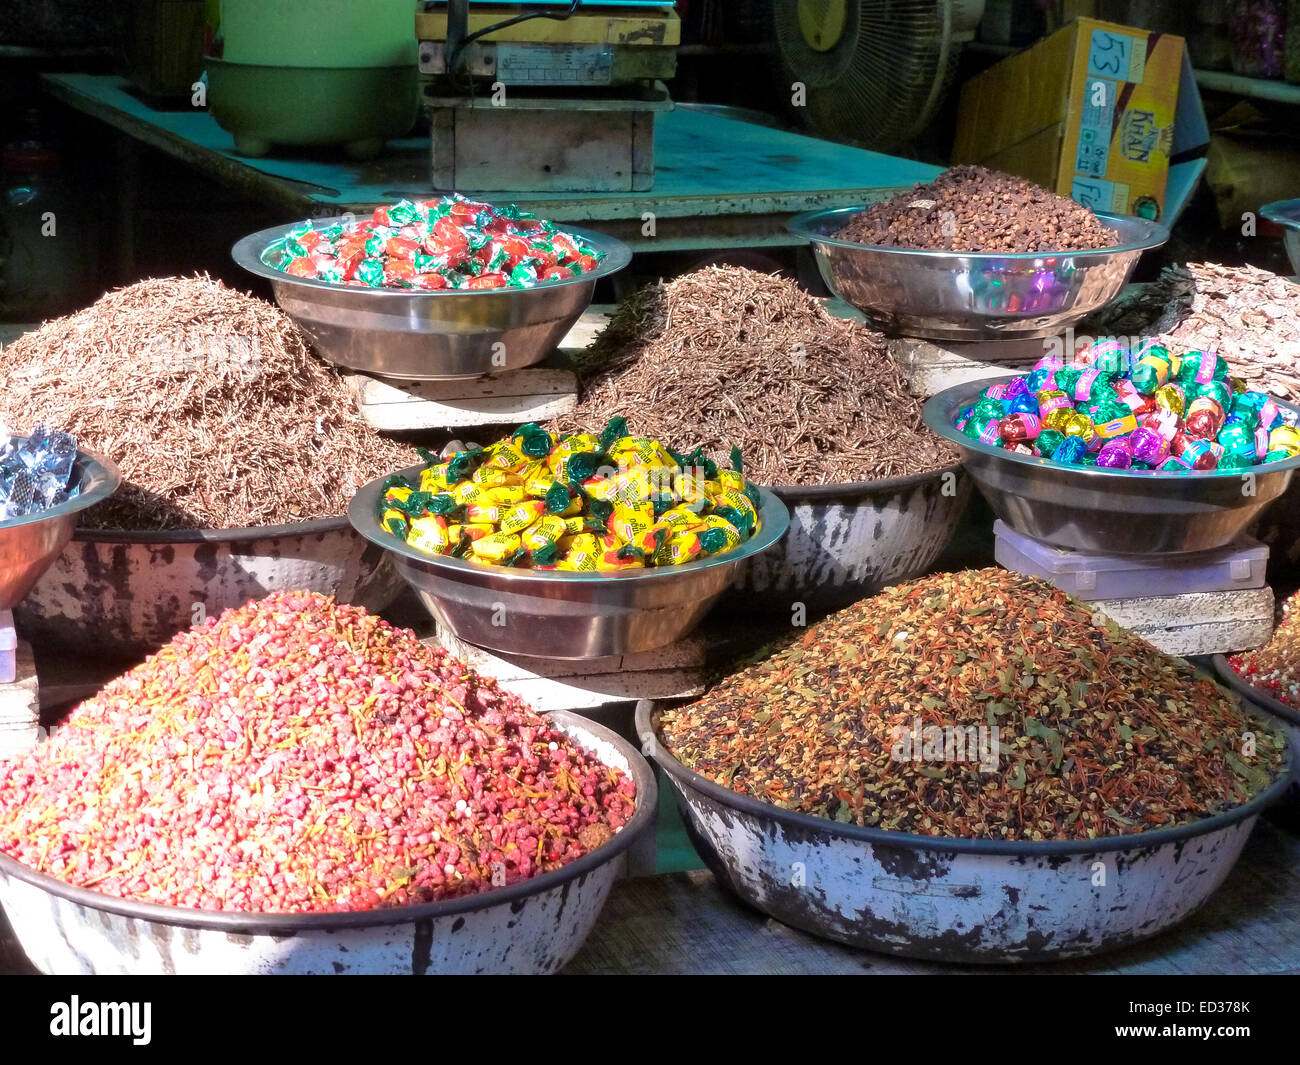 street stall in gujarat india with ingredients and sweets Stock Photo